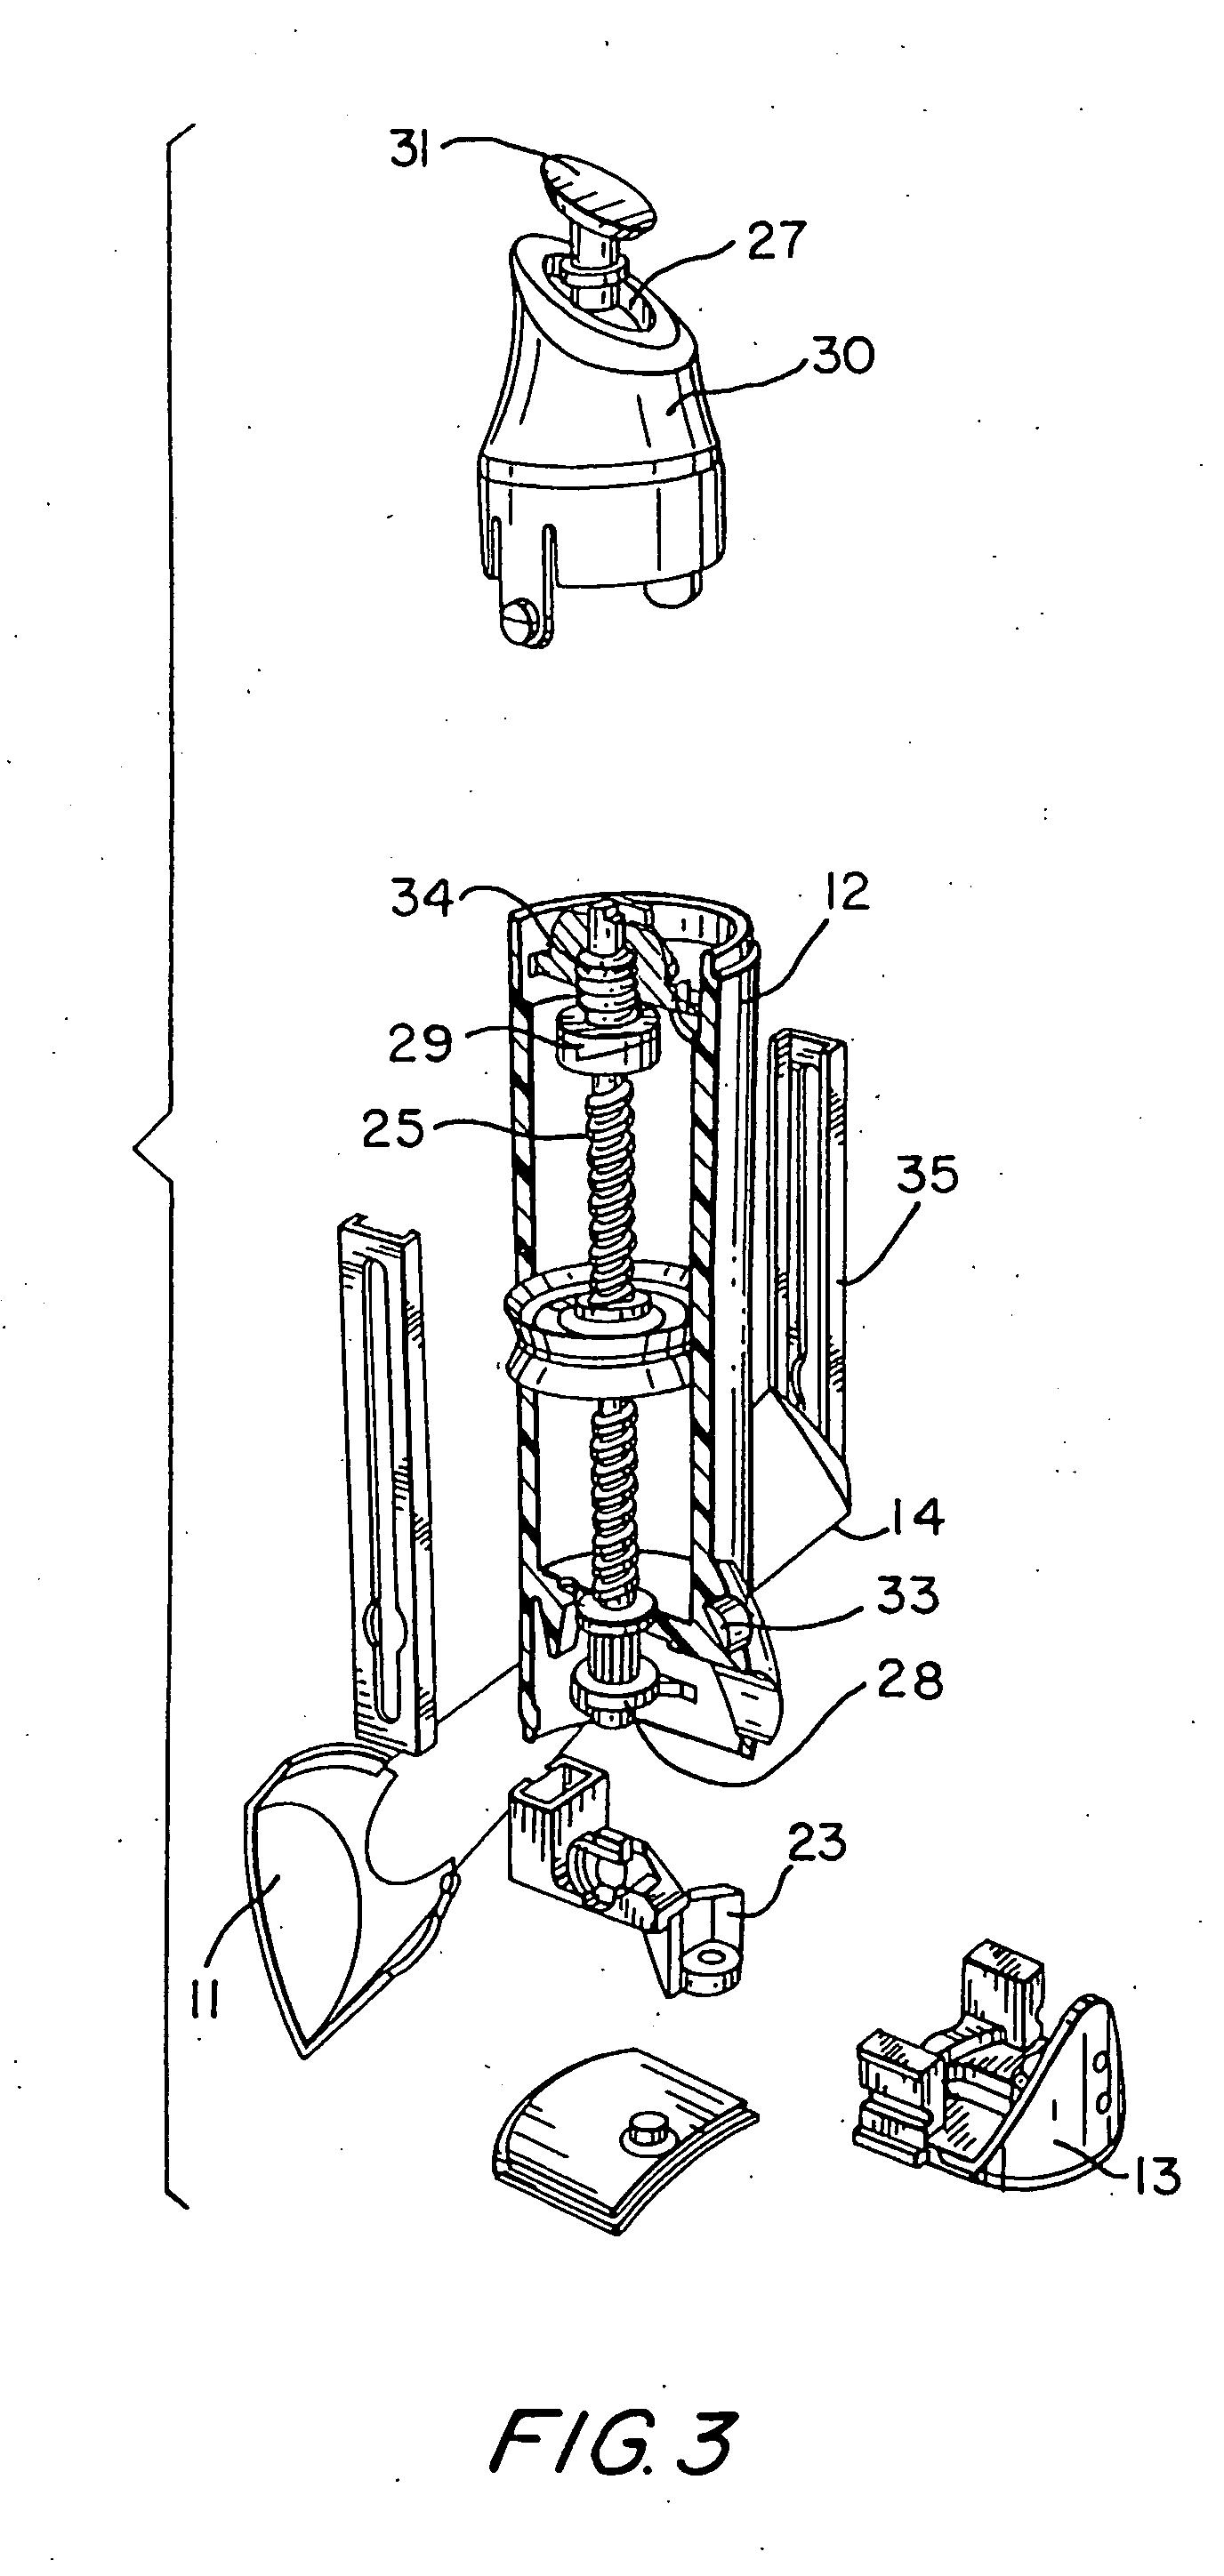 Topical administration device